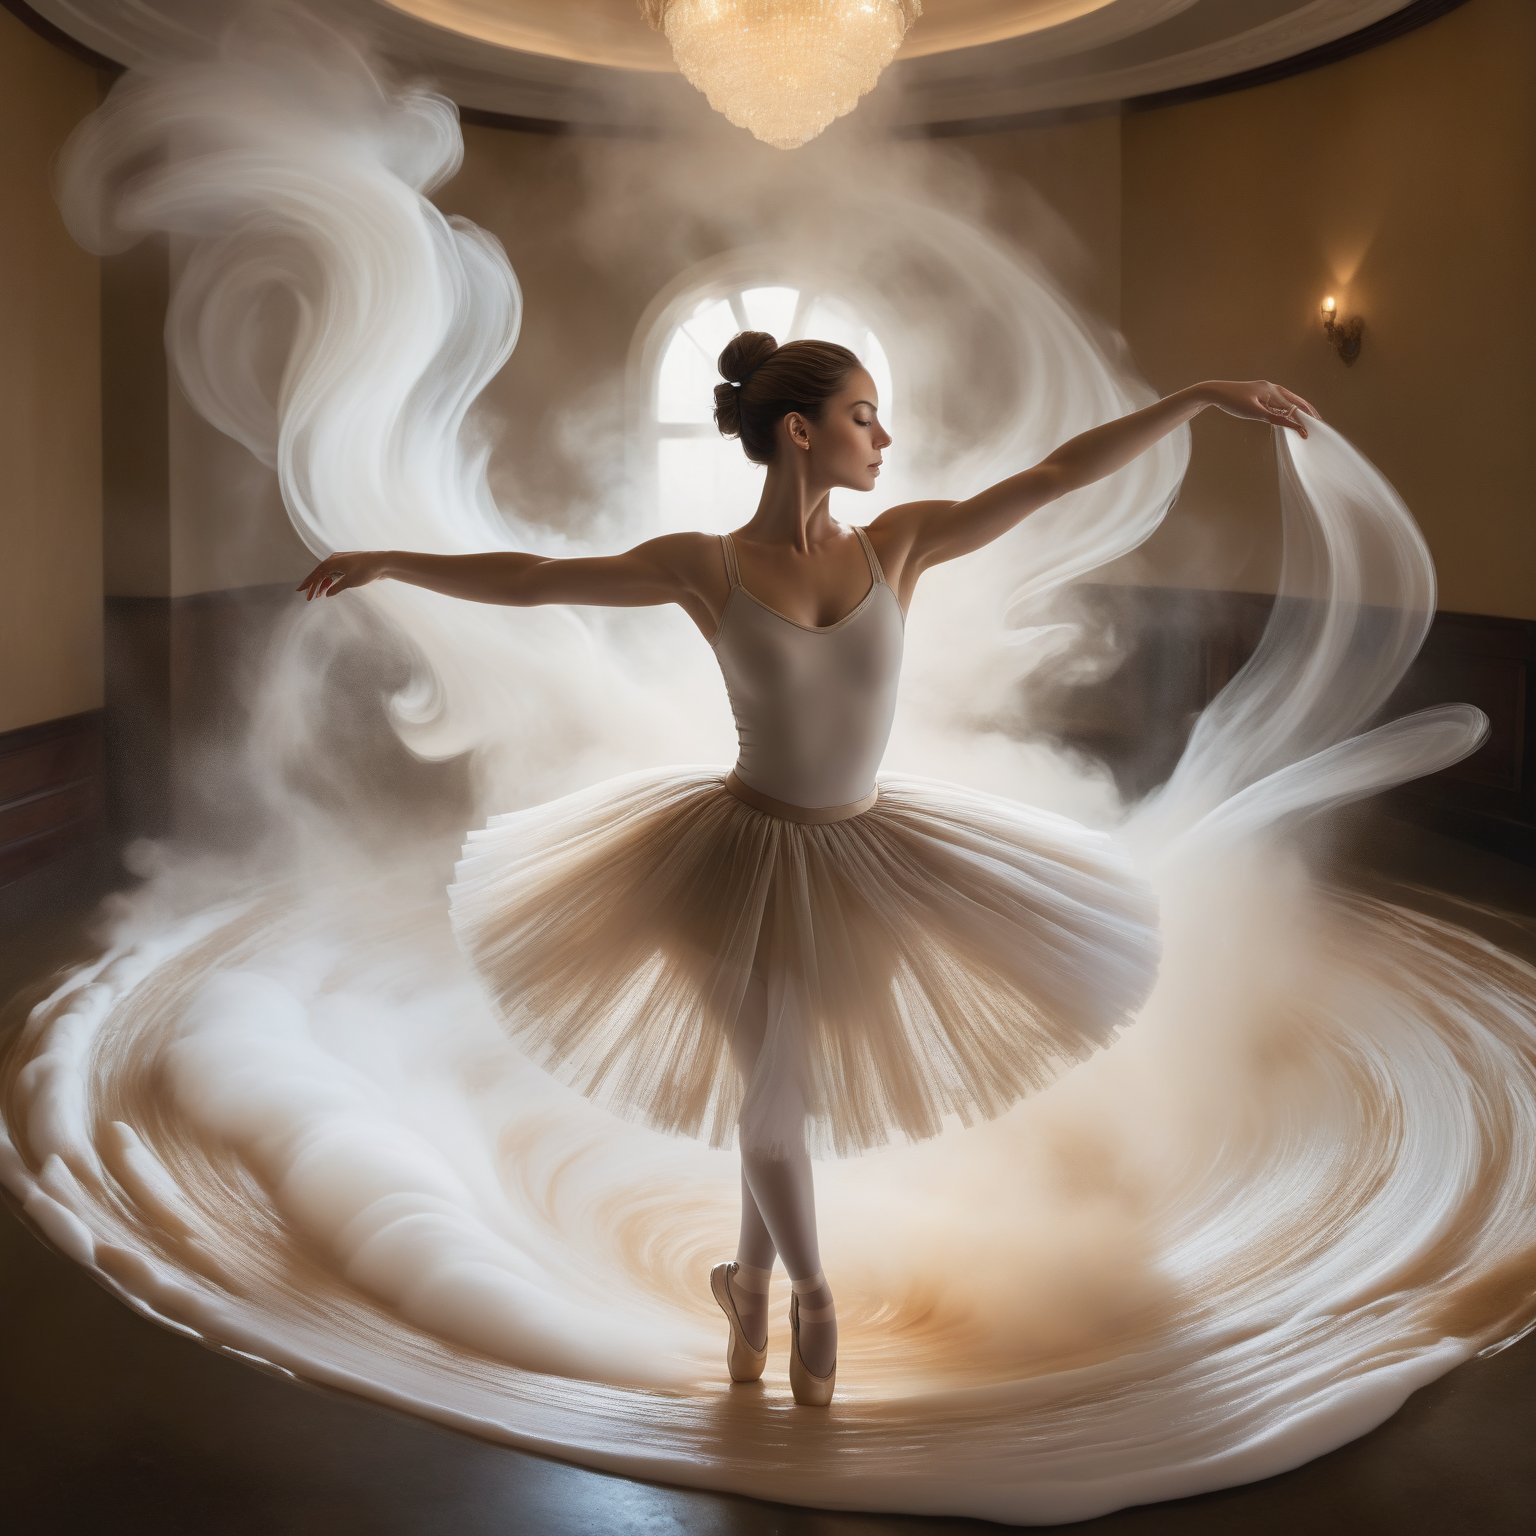 In a dimly lit, smoky room, a delicate ballerina emerges from a whirlpool of creamy coffee foam, her tutu-like skirt wisping outwards as she rises. Artistic brushstrokes adorn the interior of a nearby coffee cup, its rim tracing a circular border around the scene. From above, the viewer gazes upon this whimsical tableau, surrounded by a haze of smoke and scattered coffee beans.